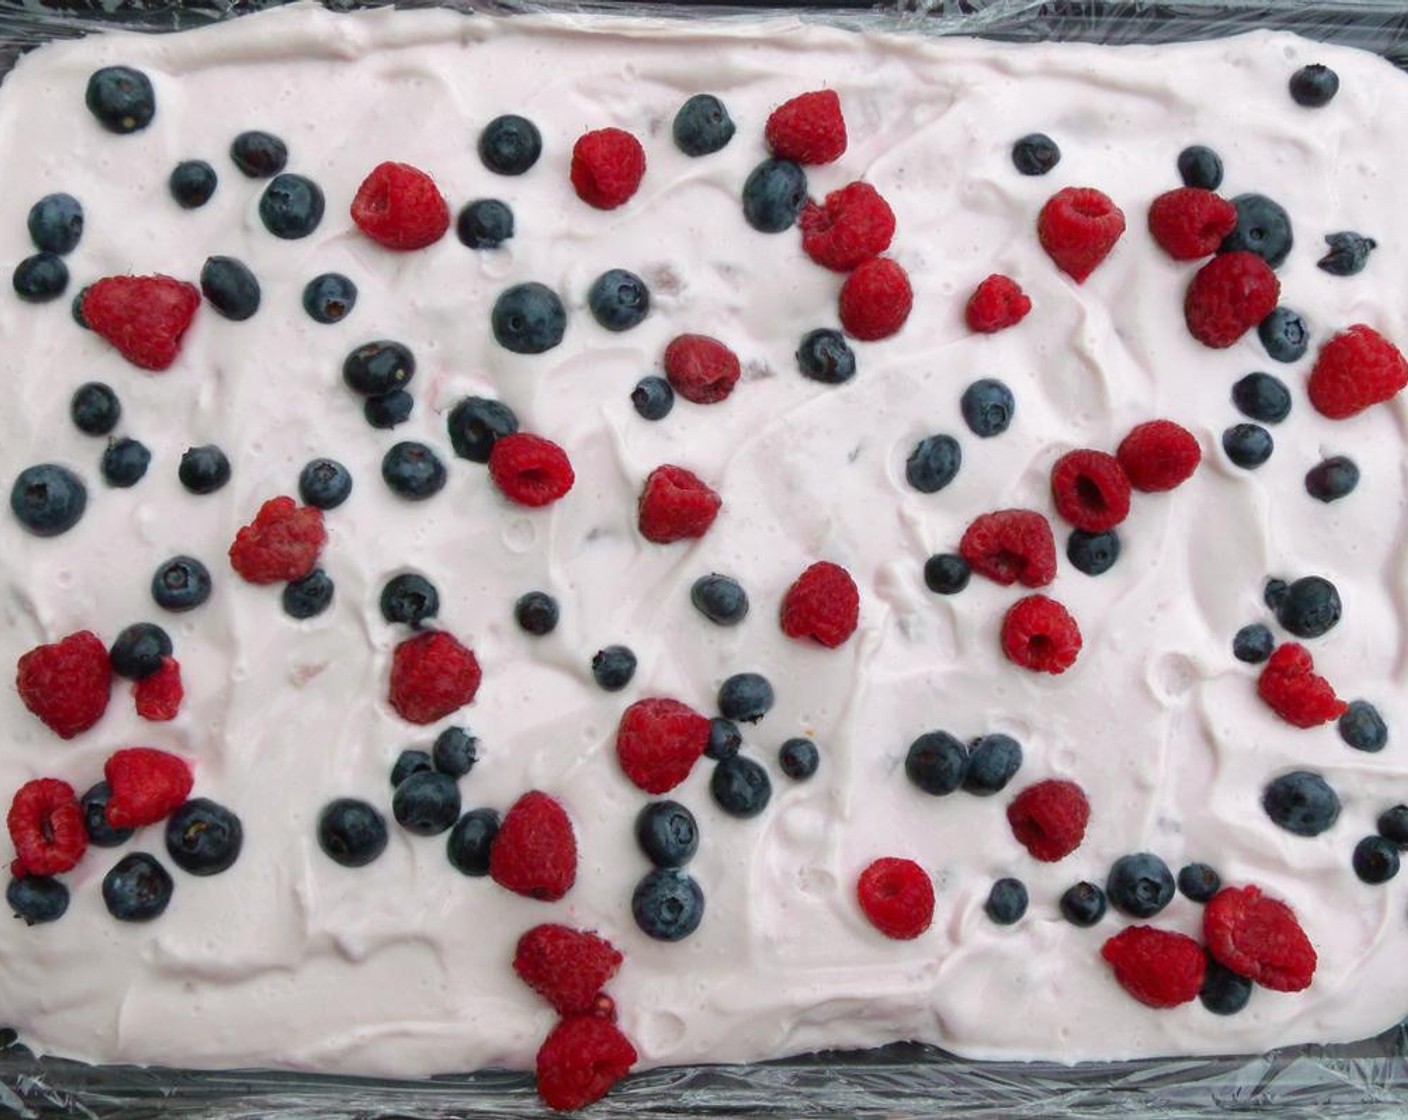 step 6 Sprinkle Fresh Raspberries (2 cups) and Fresh Blueberries (2 cups) evenly on the strawberry yogurt.